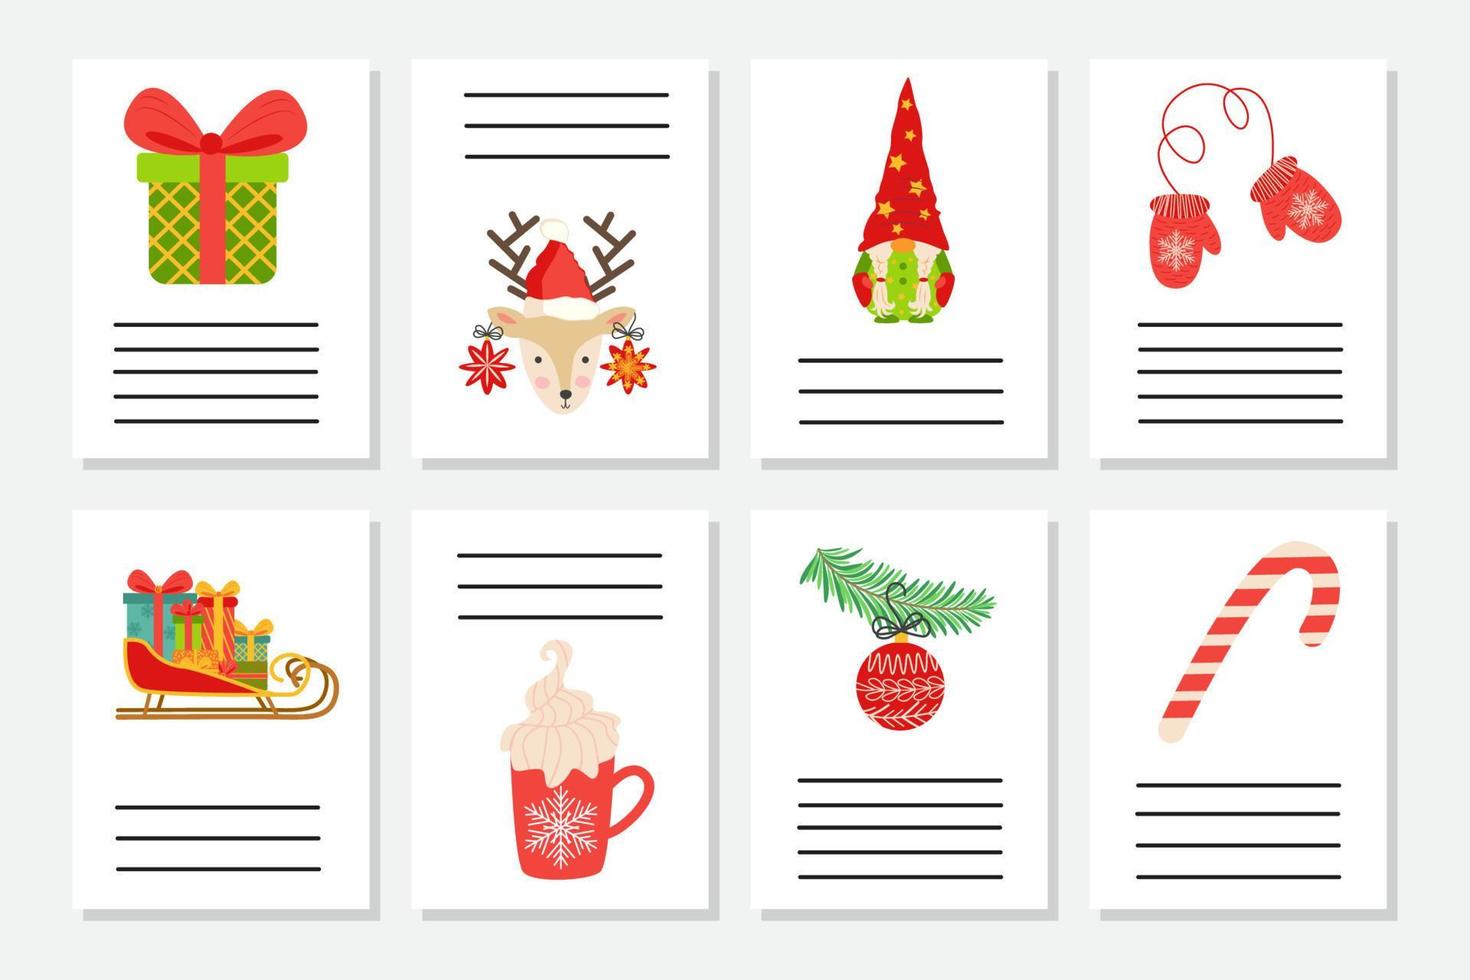 Set of Christmas greeting or invitation. Postcards with New Years symbols, Christmas tree, snowflakes, gifts, candy cane vector